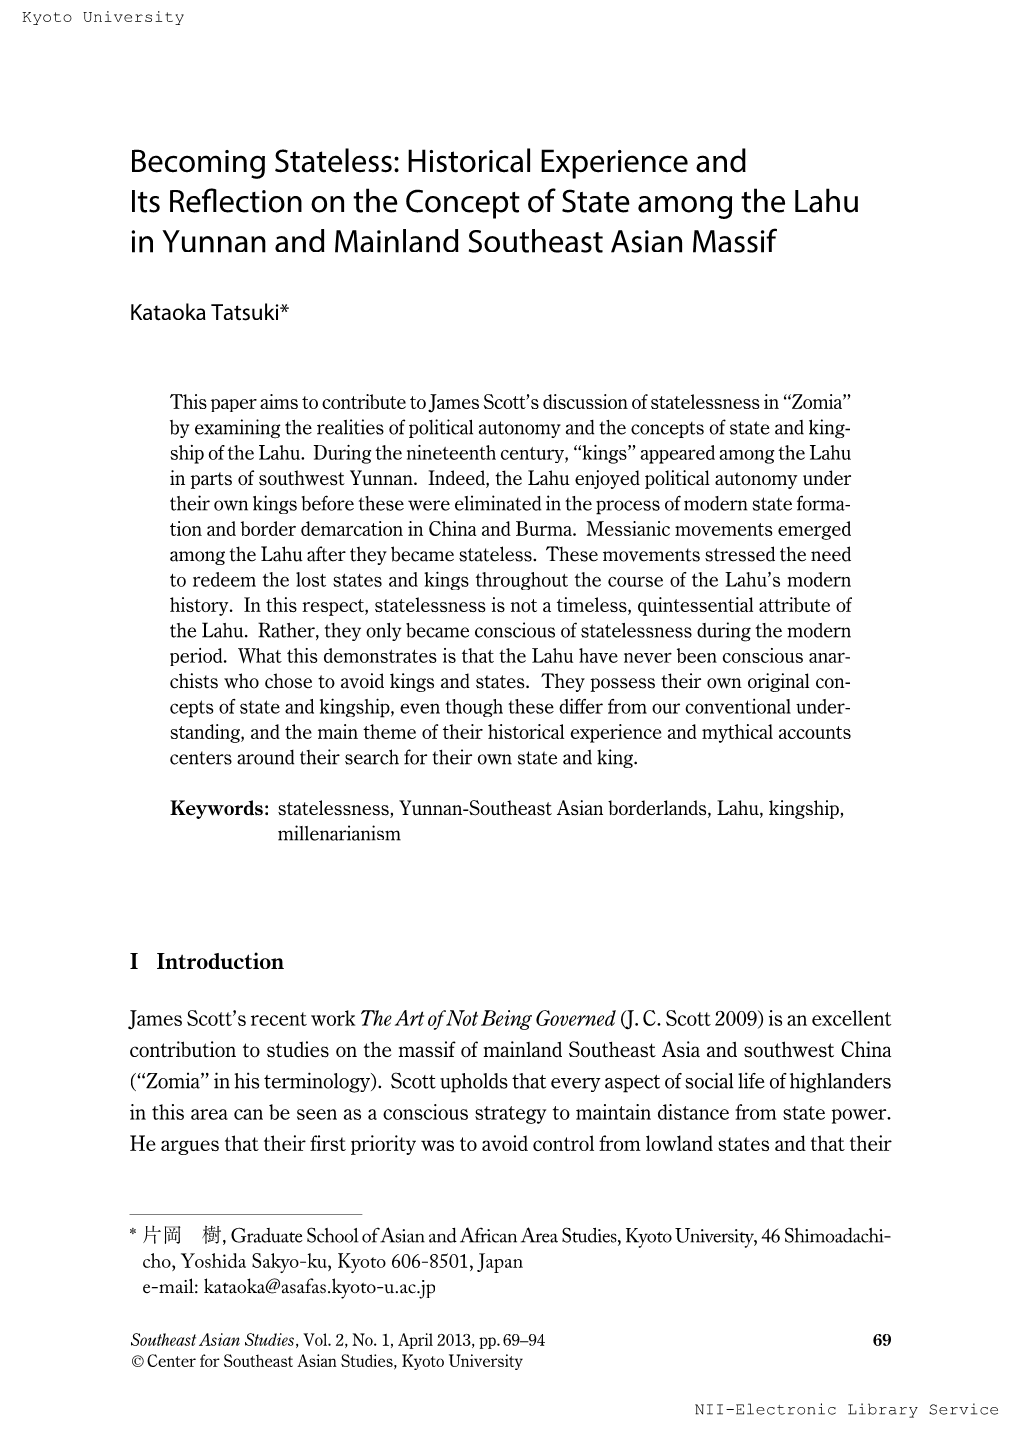 Historical Experience and Its Reflection on the Concept of State Among the Lahu in Yunnan and Mainland South